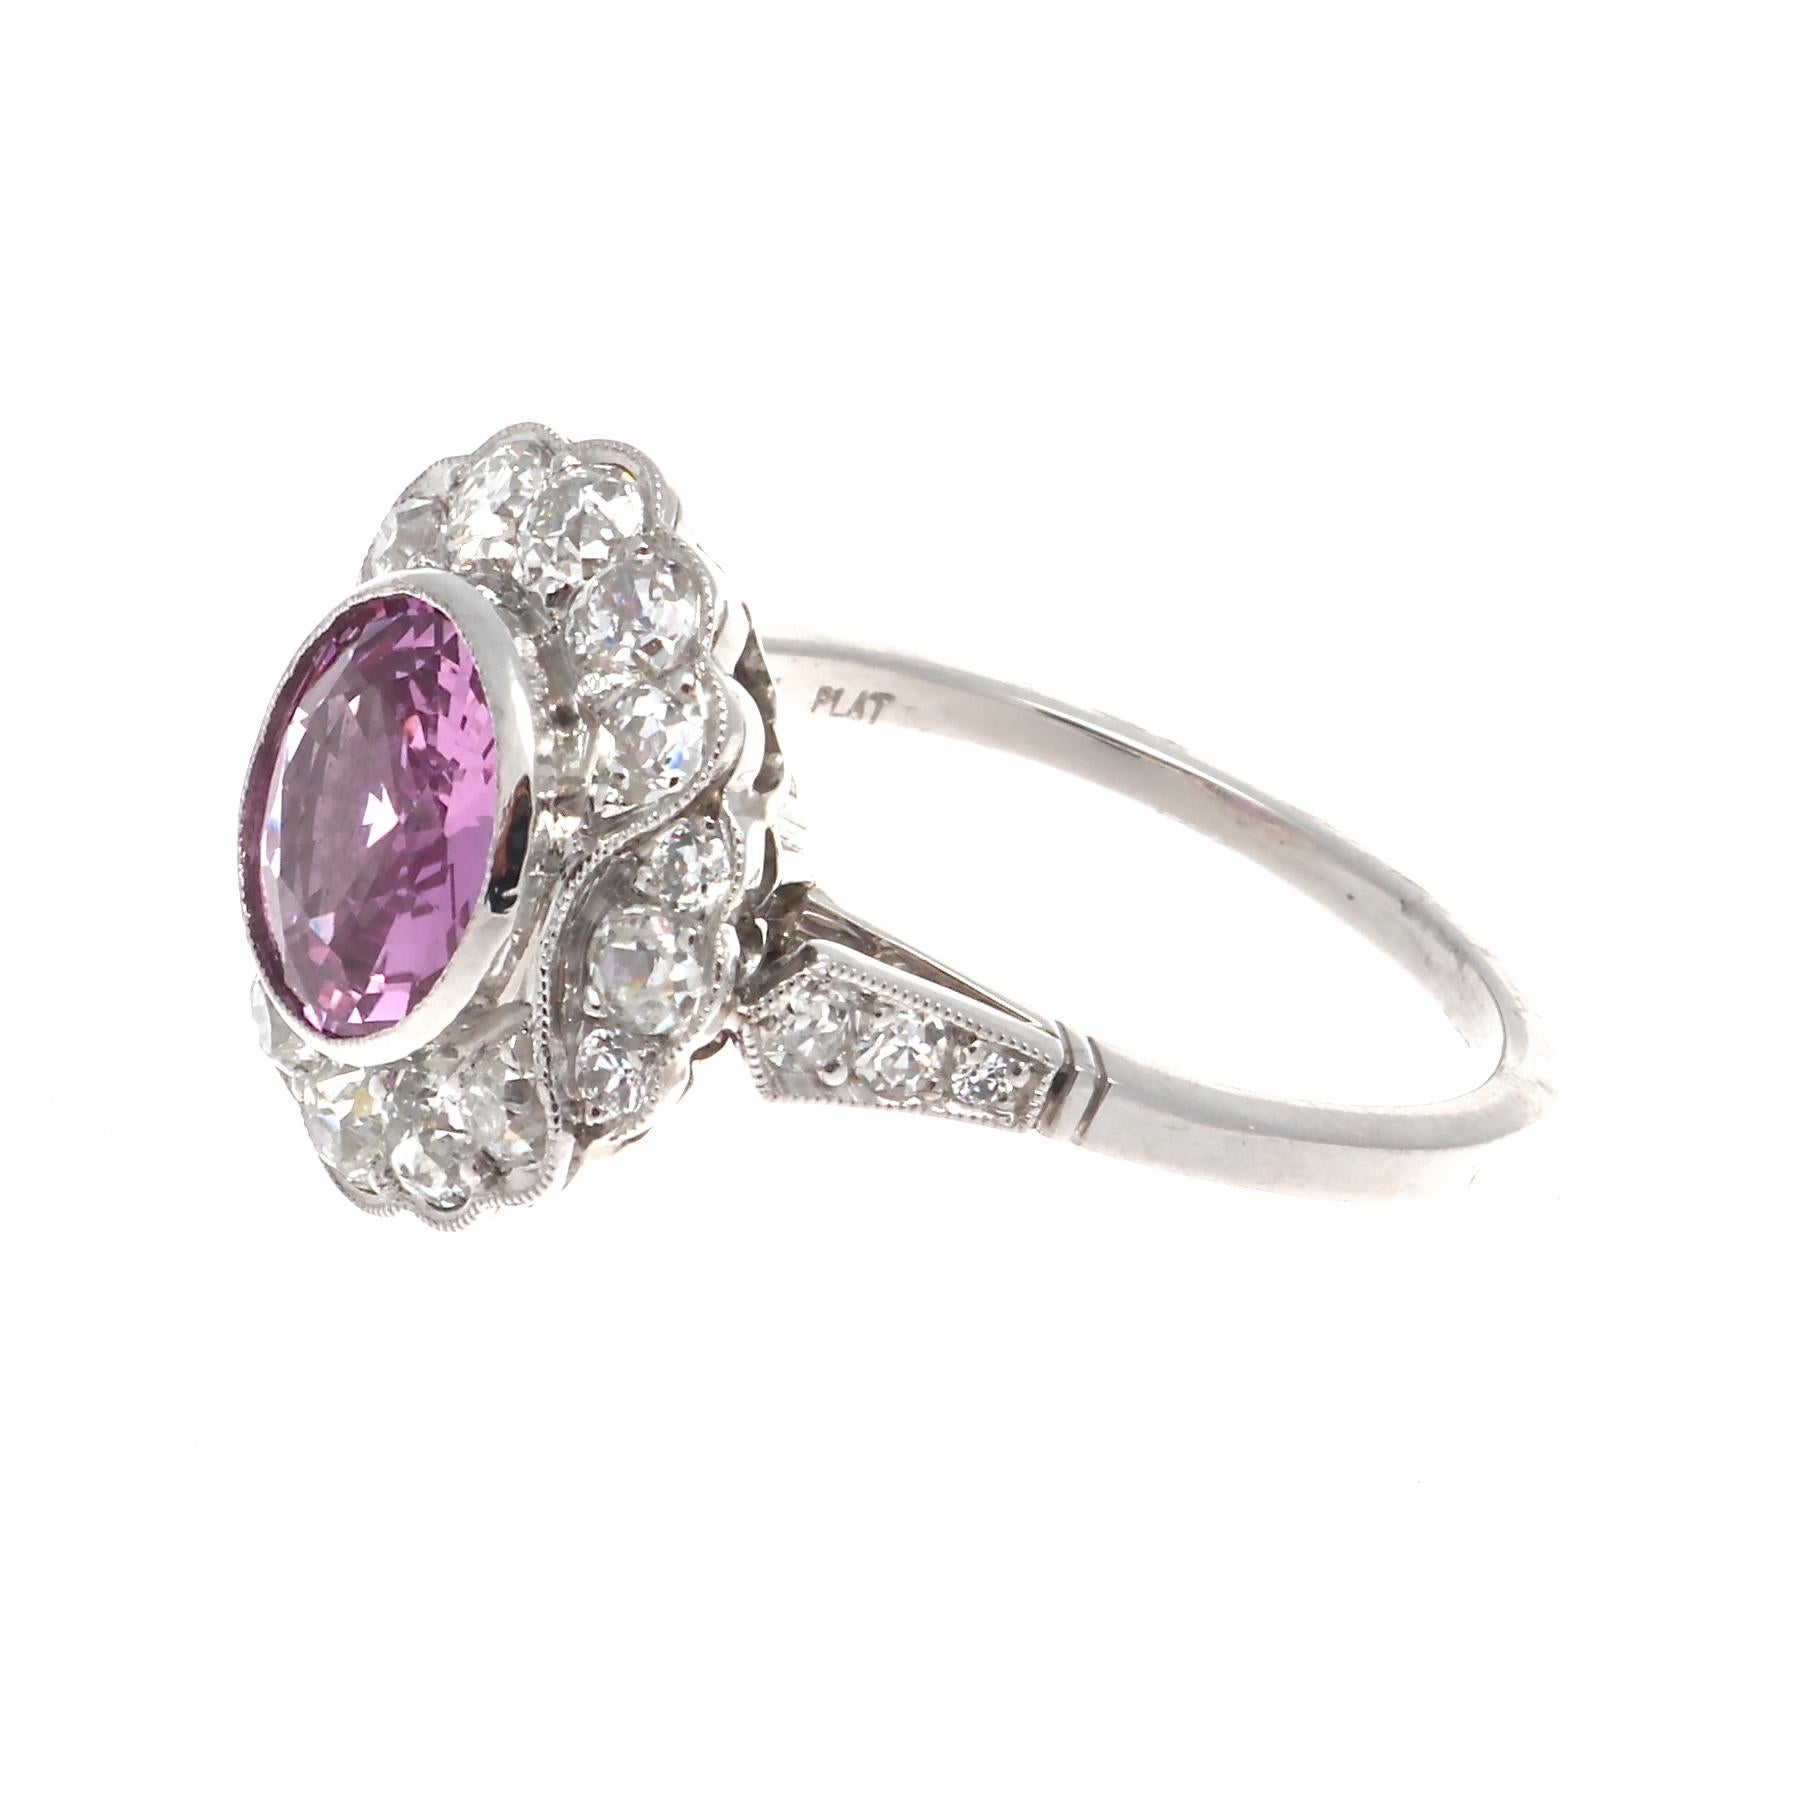 A traditional idea synthesized with a symphony of color. The perfect way to remember old times and good times to come, with your loved one. Featuring a 1.92 carat no heat pink sapphire that is perfectly surrounded by a floating halo on near